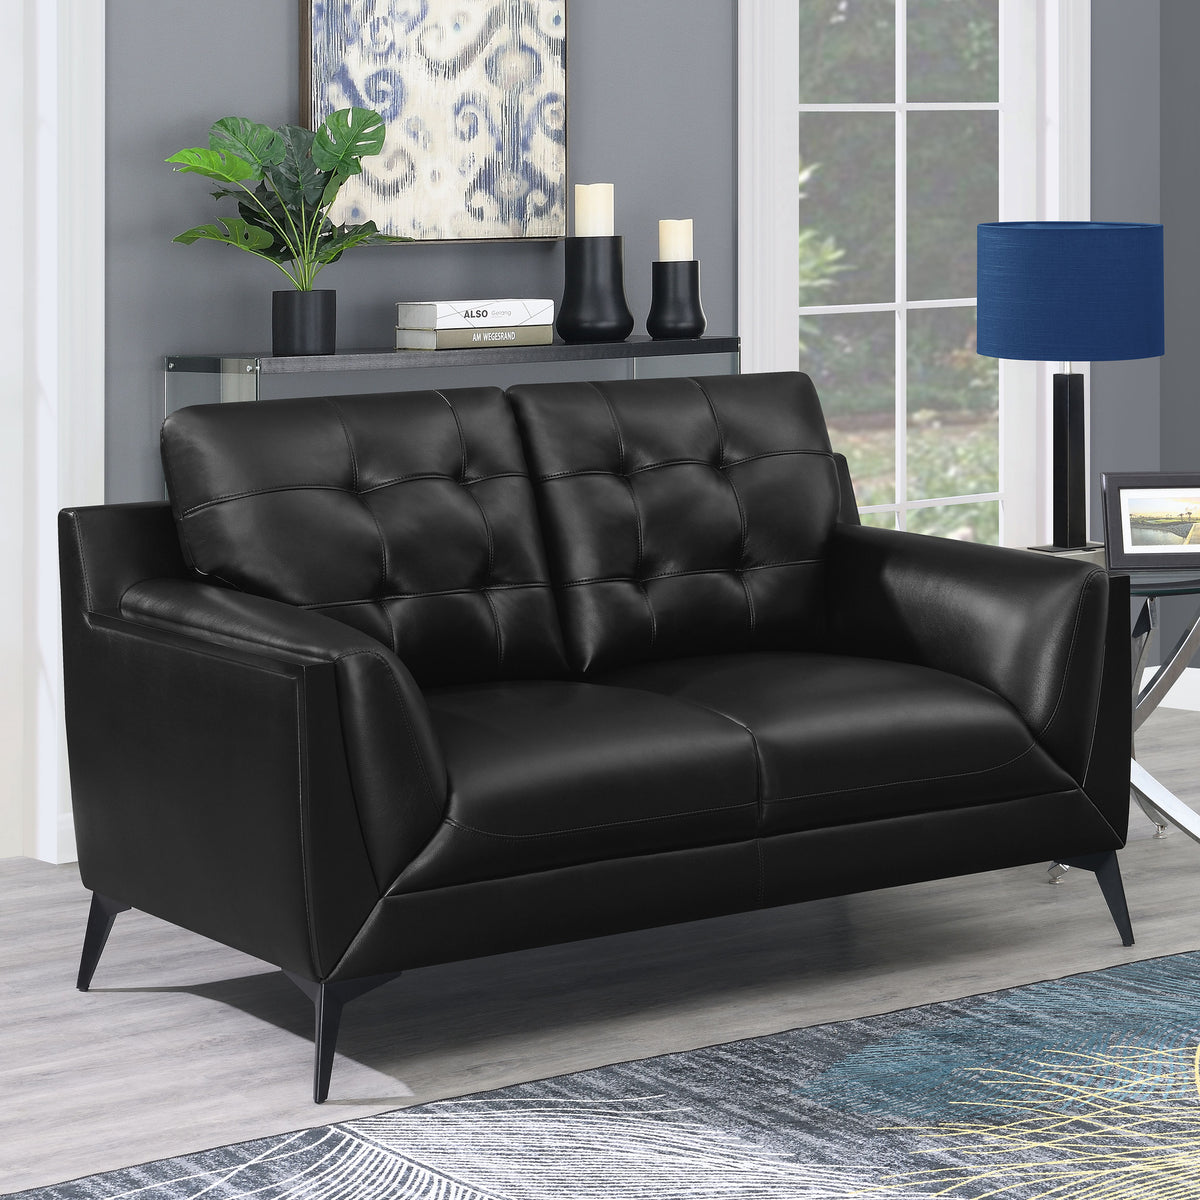 Moira Upholstered Tufted Loveseat with Track Arms Black Moira Upholstered Tufted Loveseat with Track Arms Black Half Price Furniture